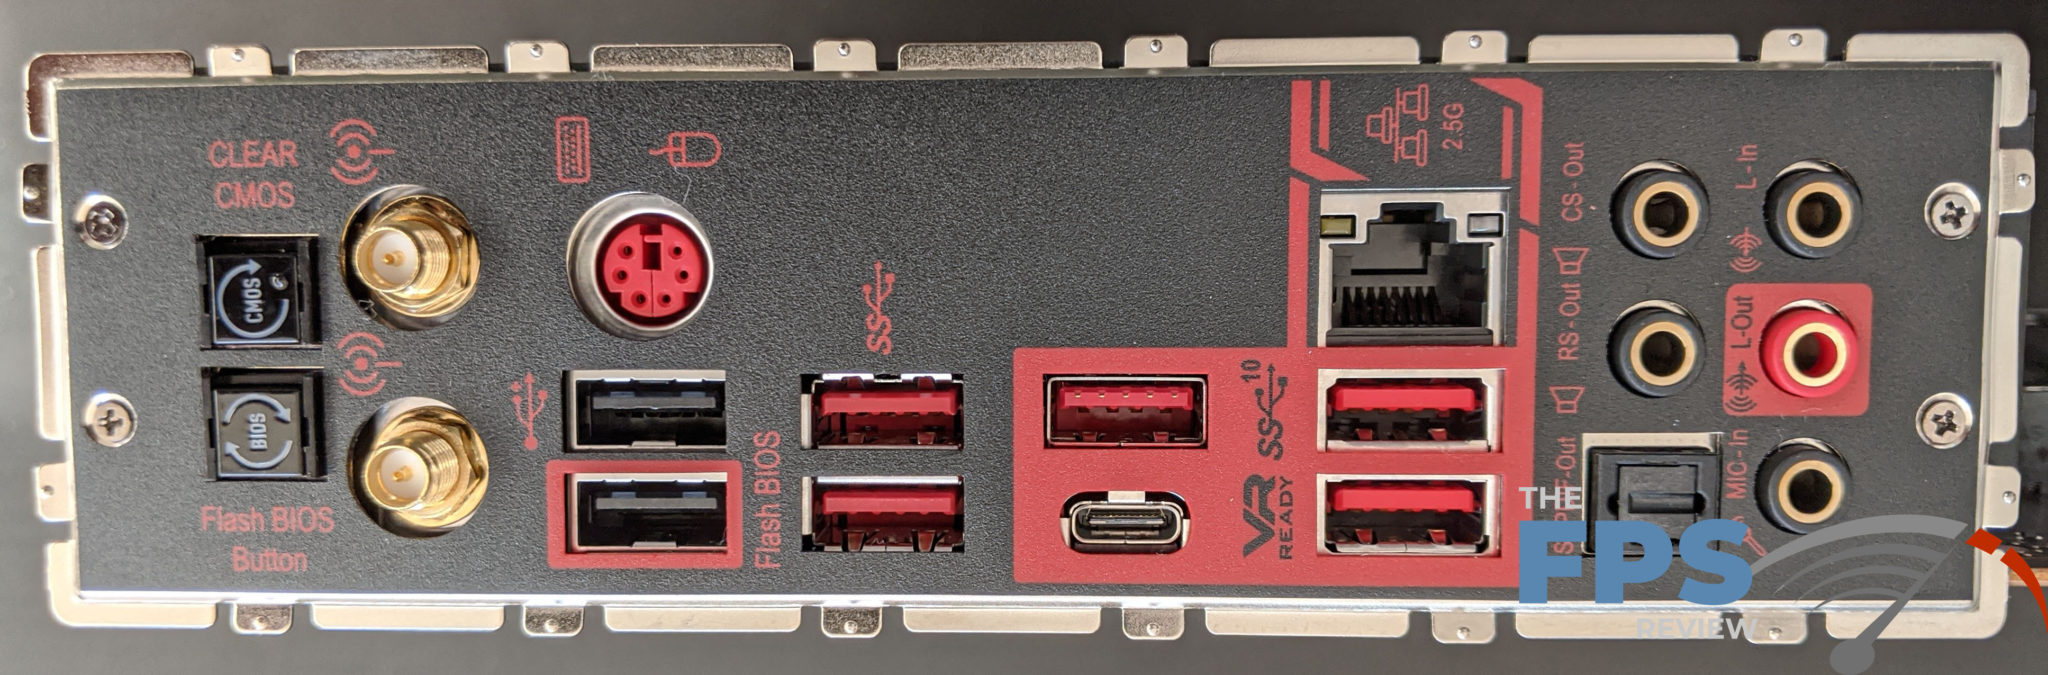 MSI MEG X570 Unify Motherboard Review - Page 3 of 14 - The FPS Review